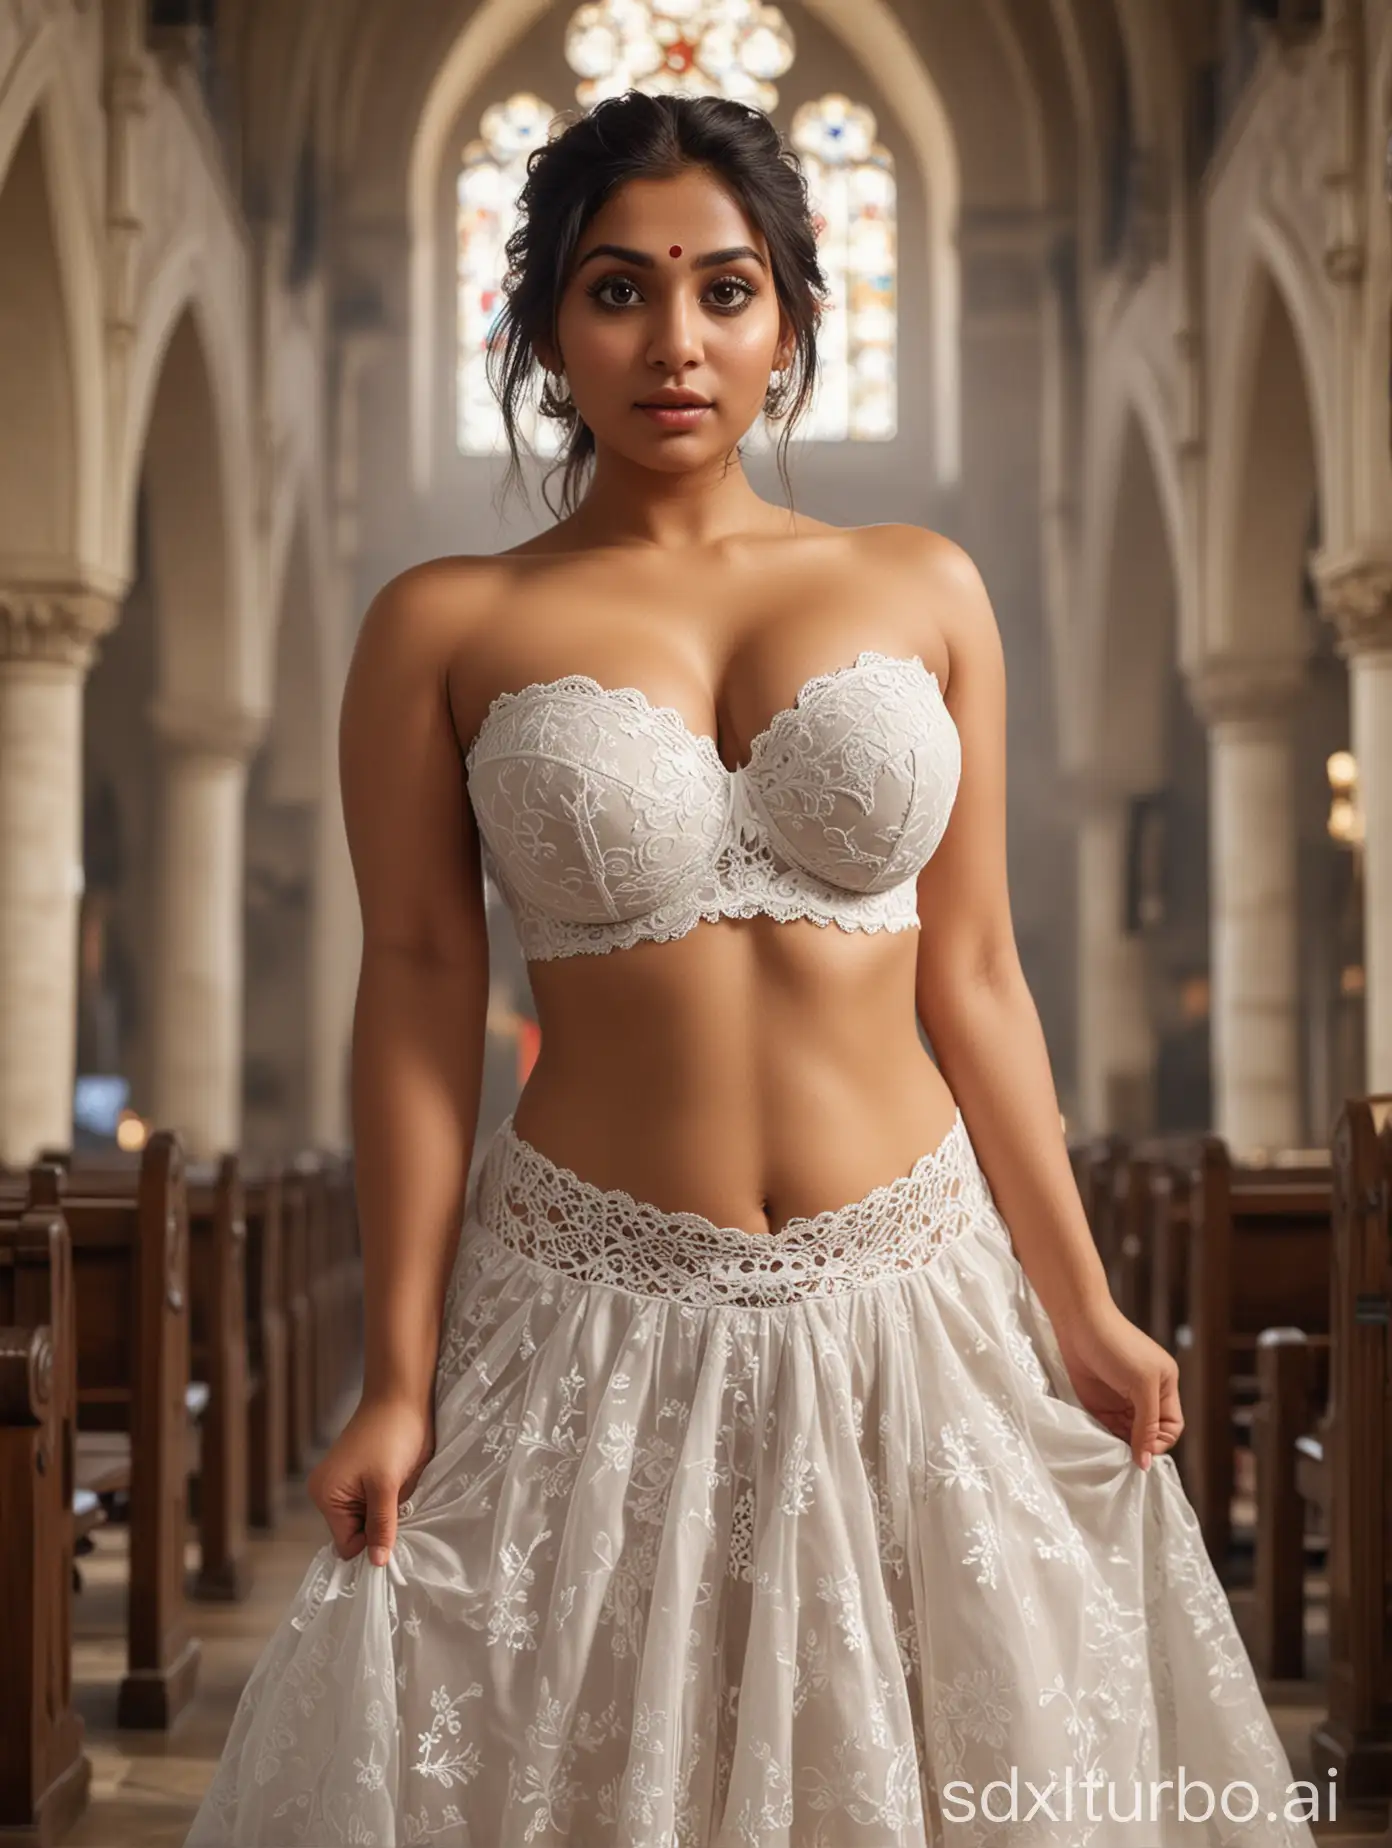 Curvy-Indian-Woman-in-Elegant-Lace-Attire-Standing-in-Crowded-Church